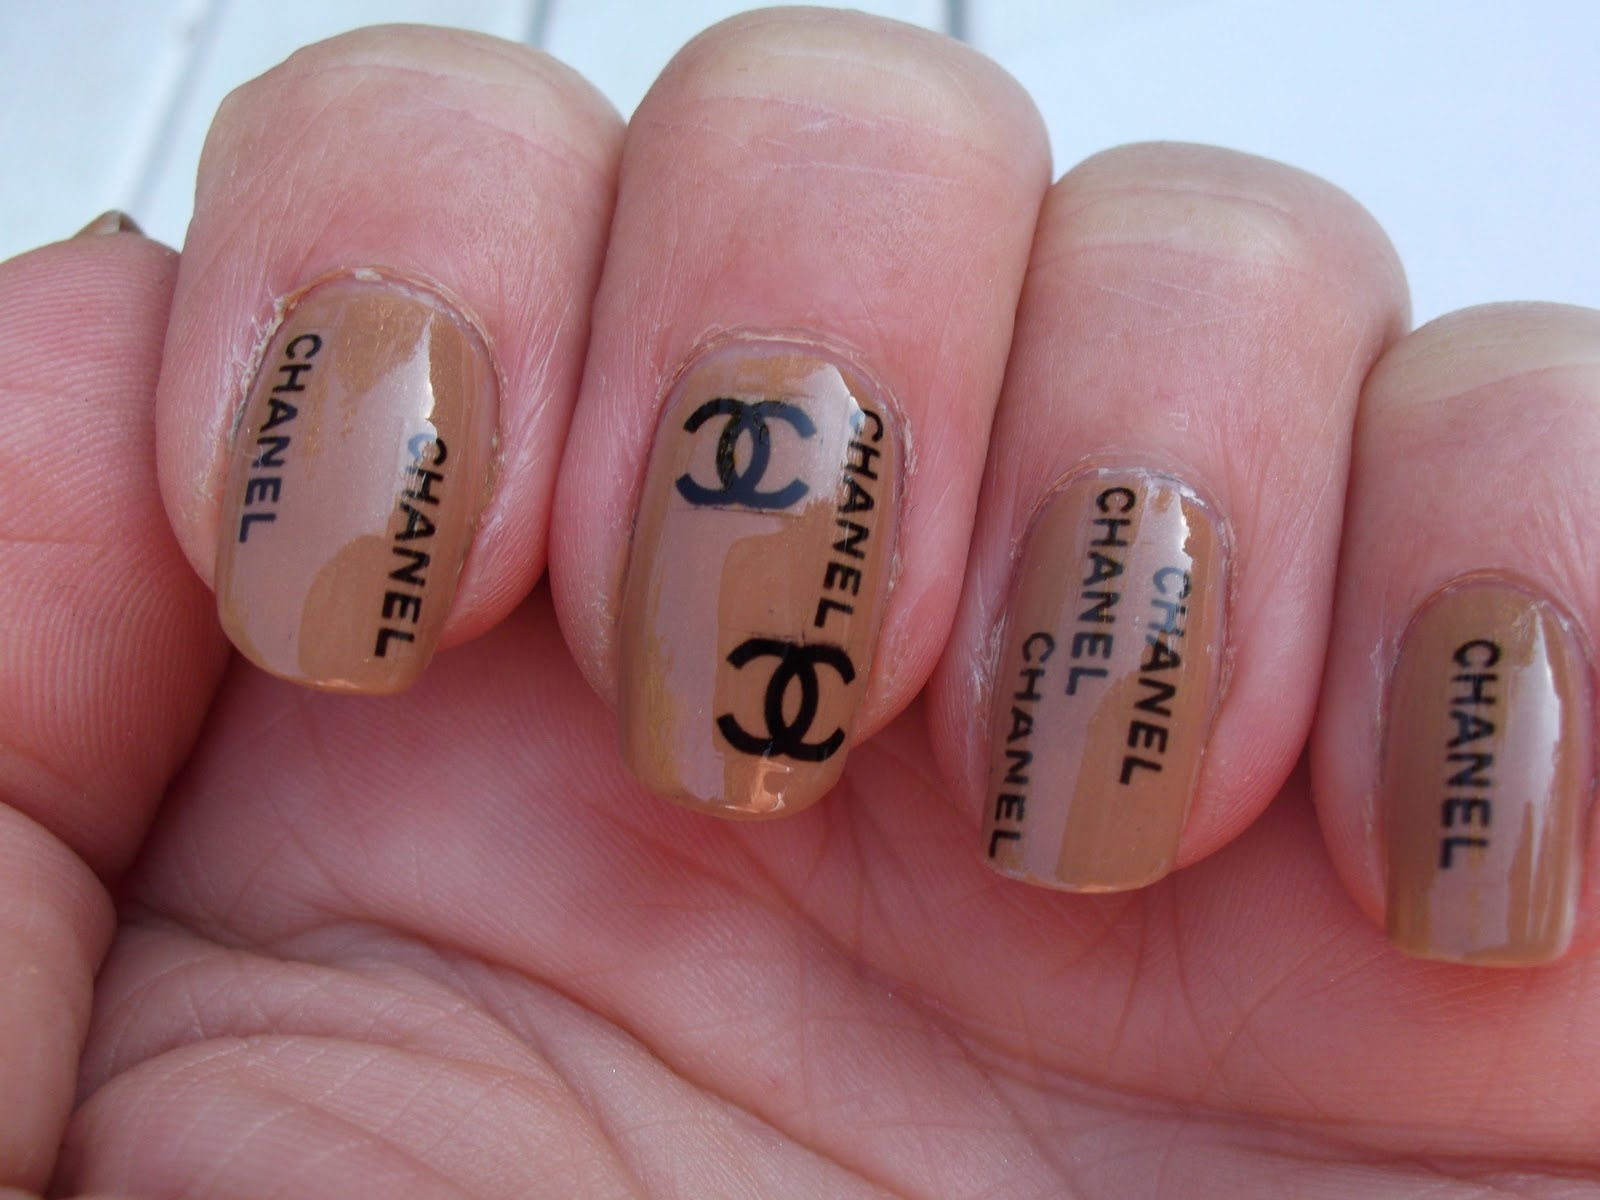 Chanel Inspired Nails  British Beauty Blogger